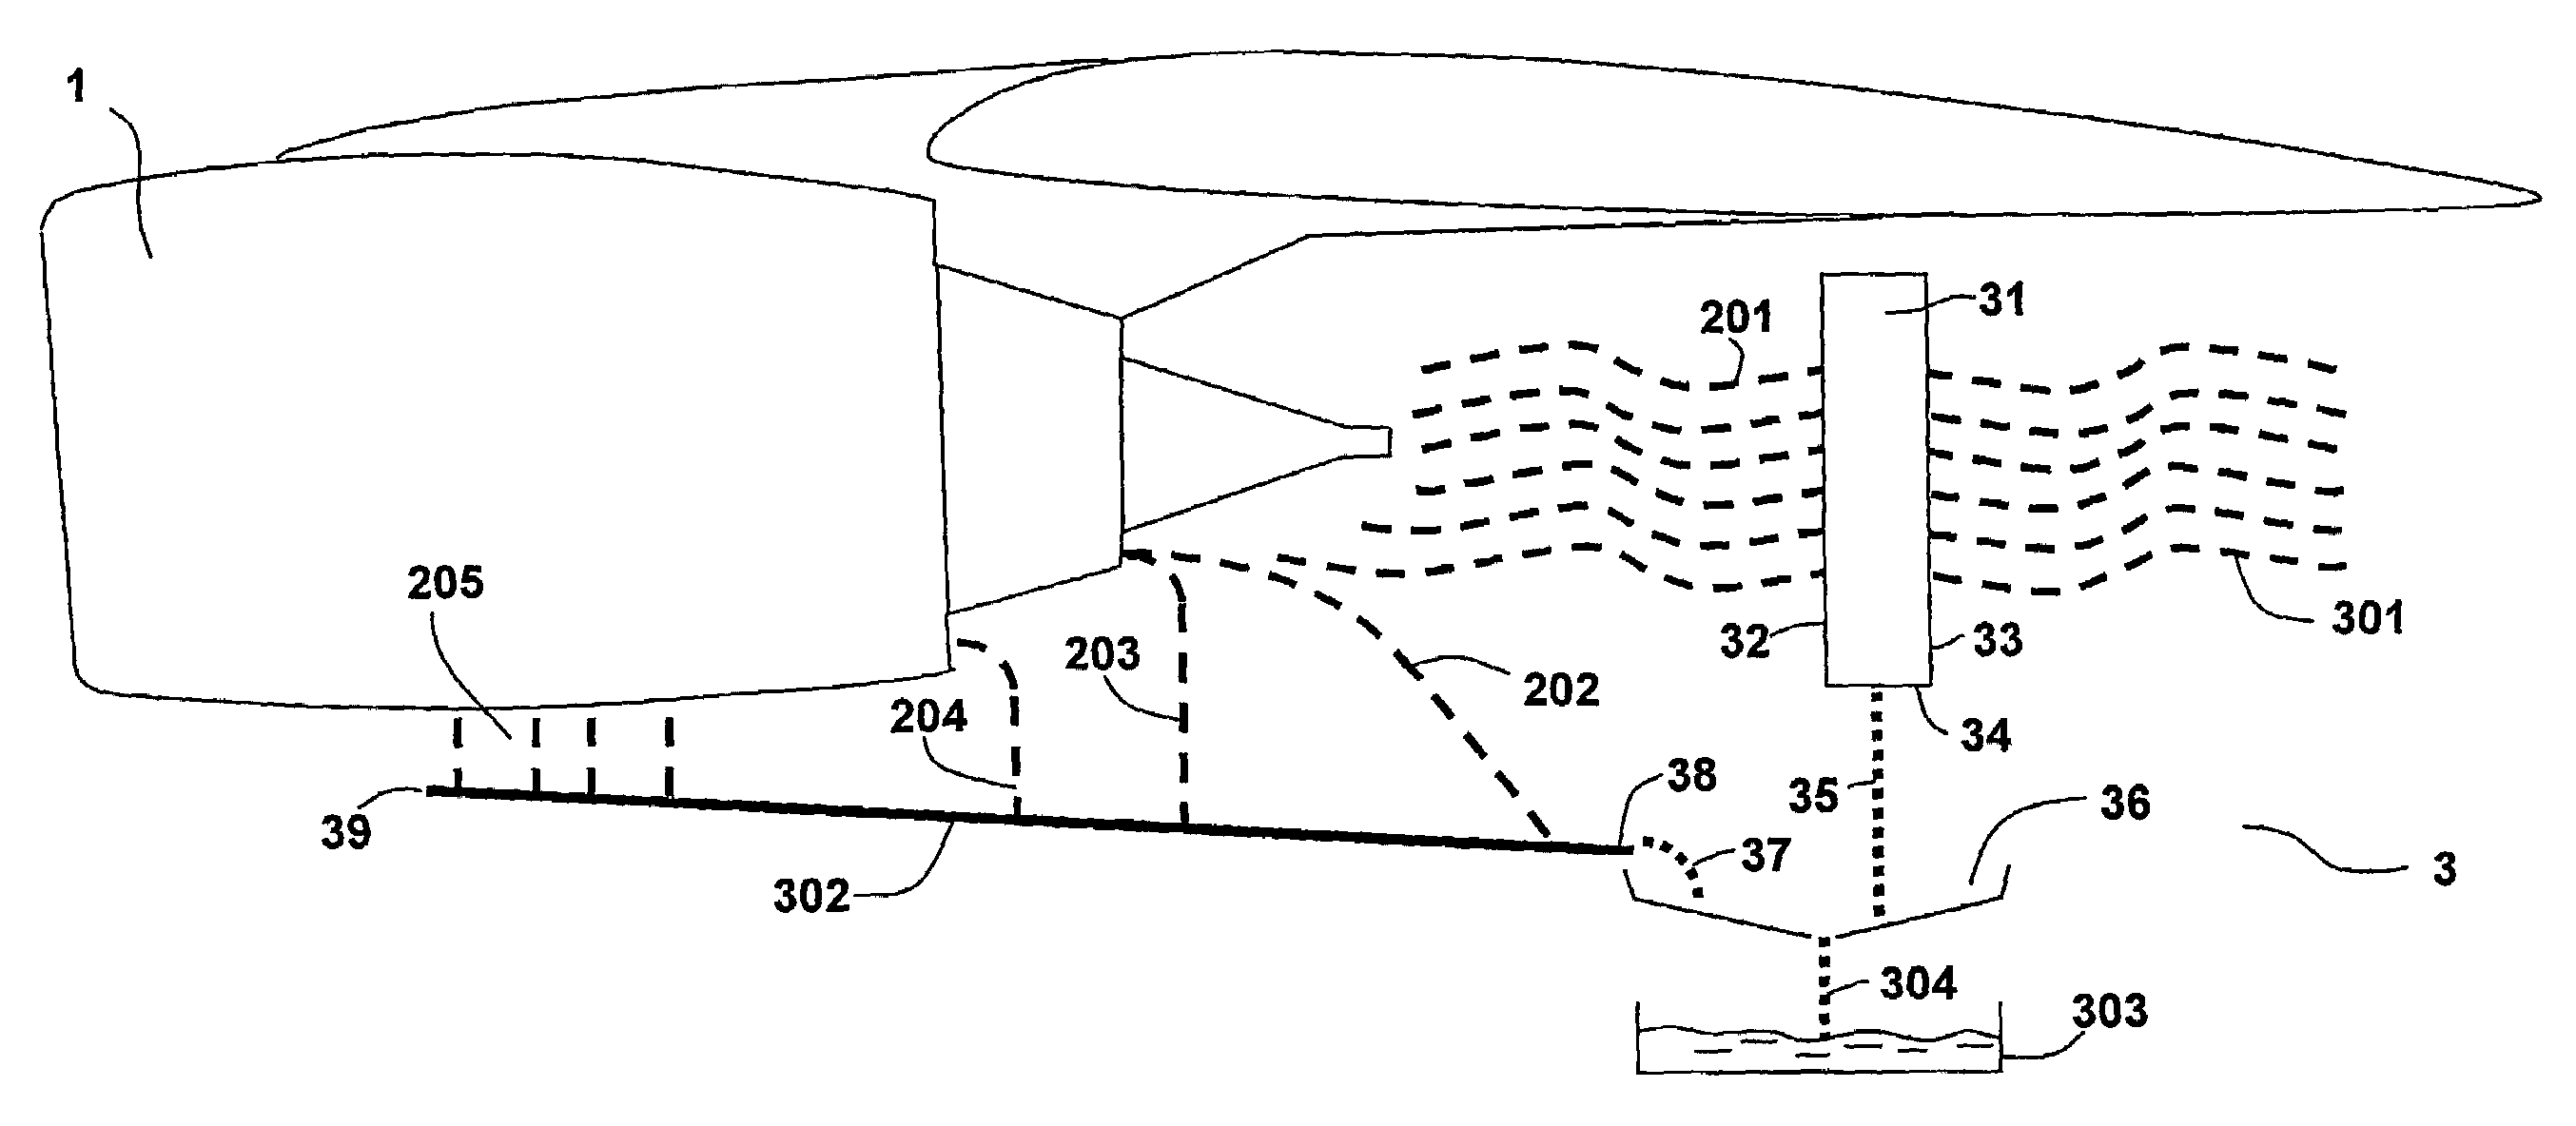 System and devices for collecting and treating waste water from engine washing